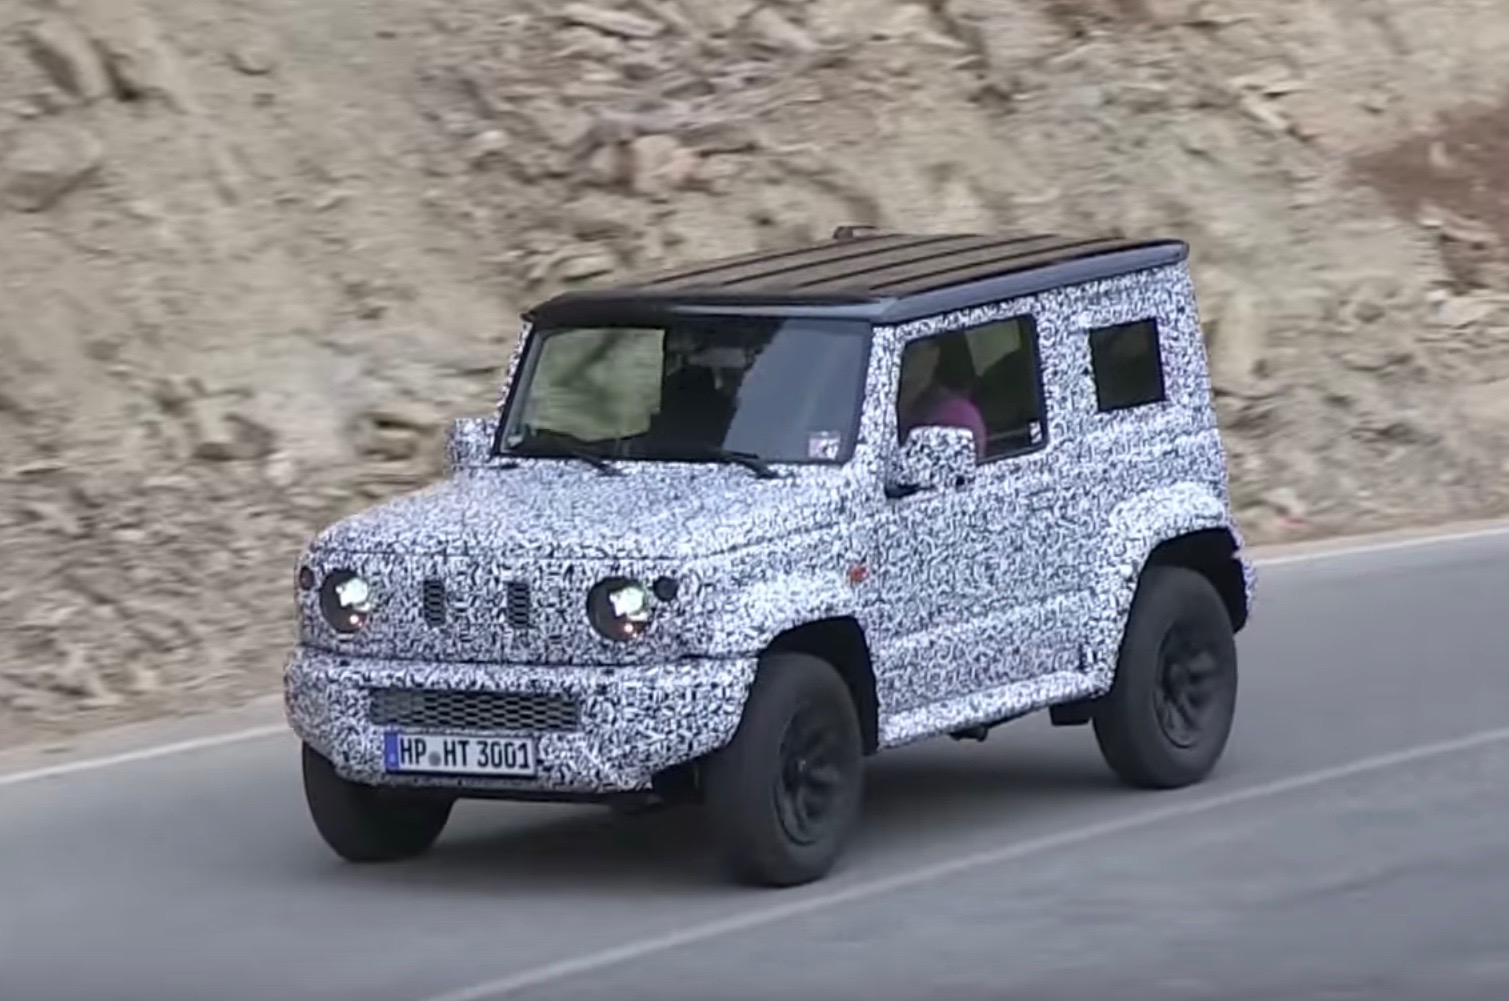 Current Suzuki Jimny production ends, new model to debut in October